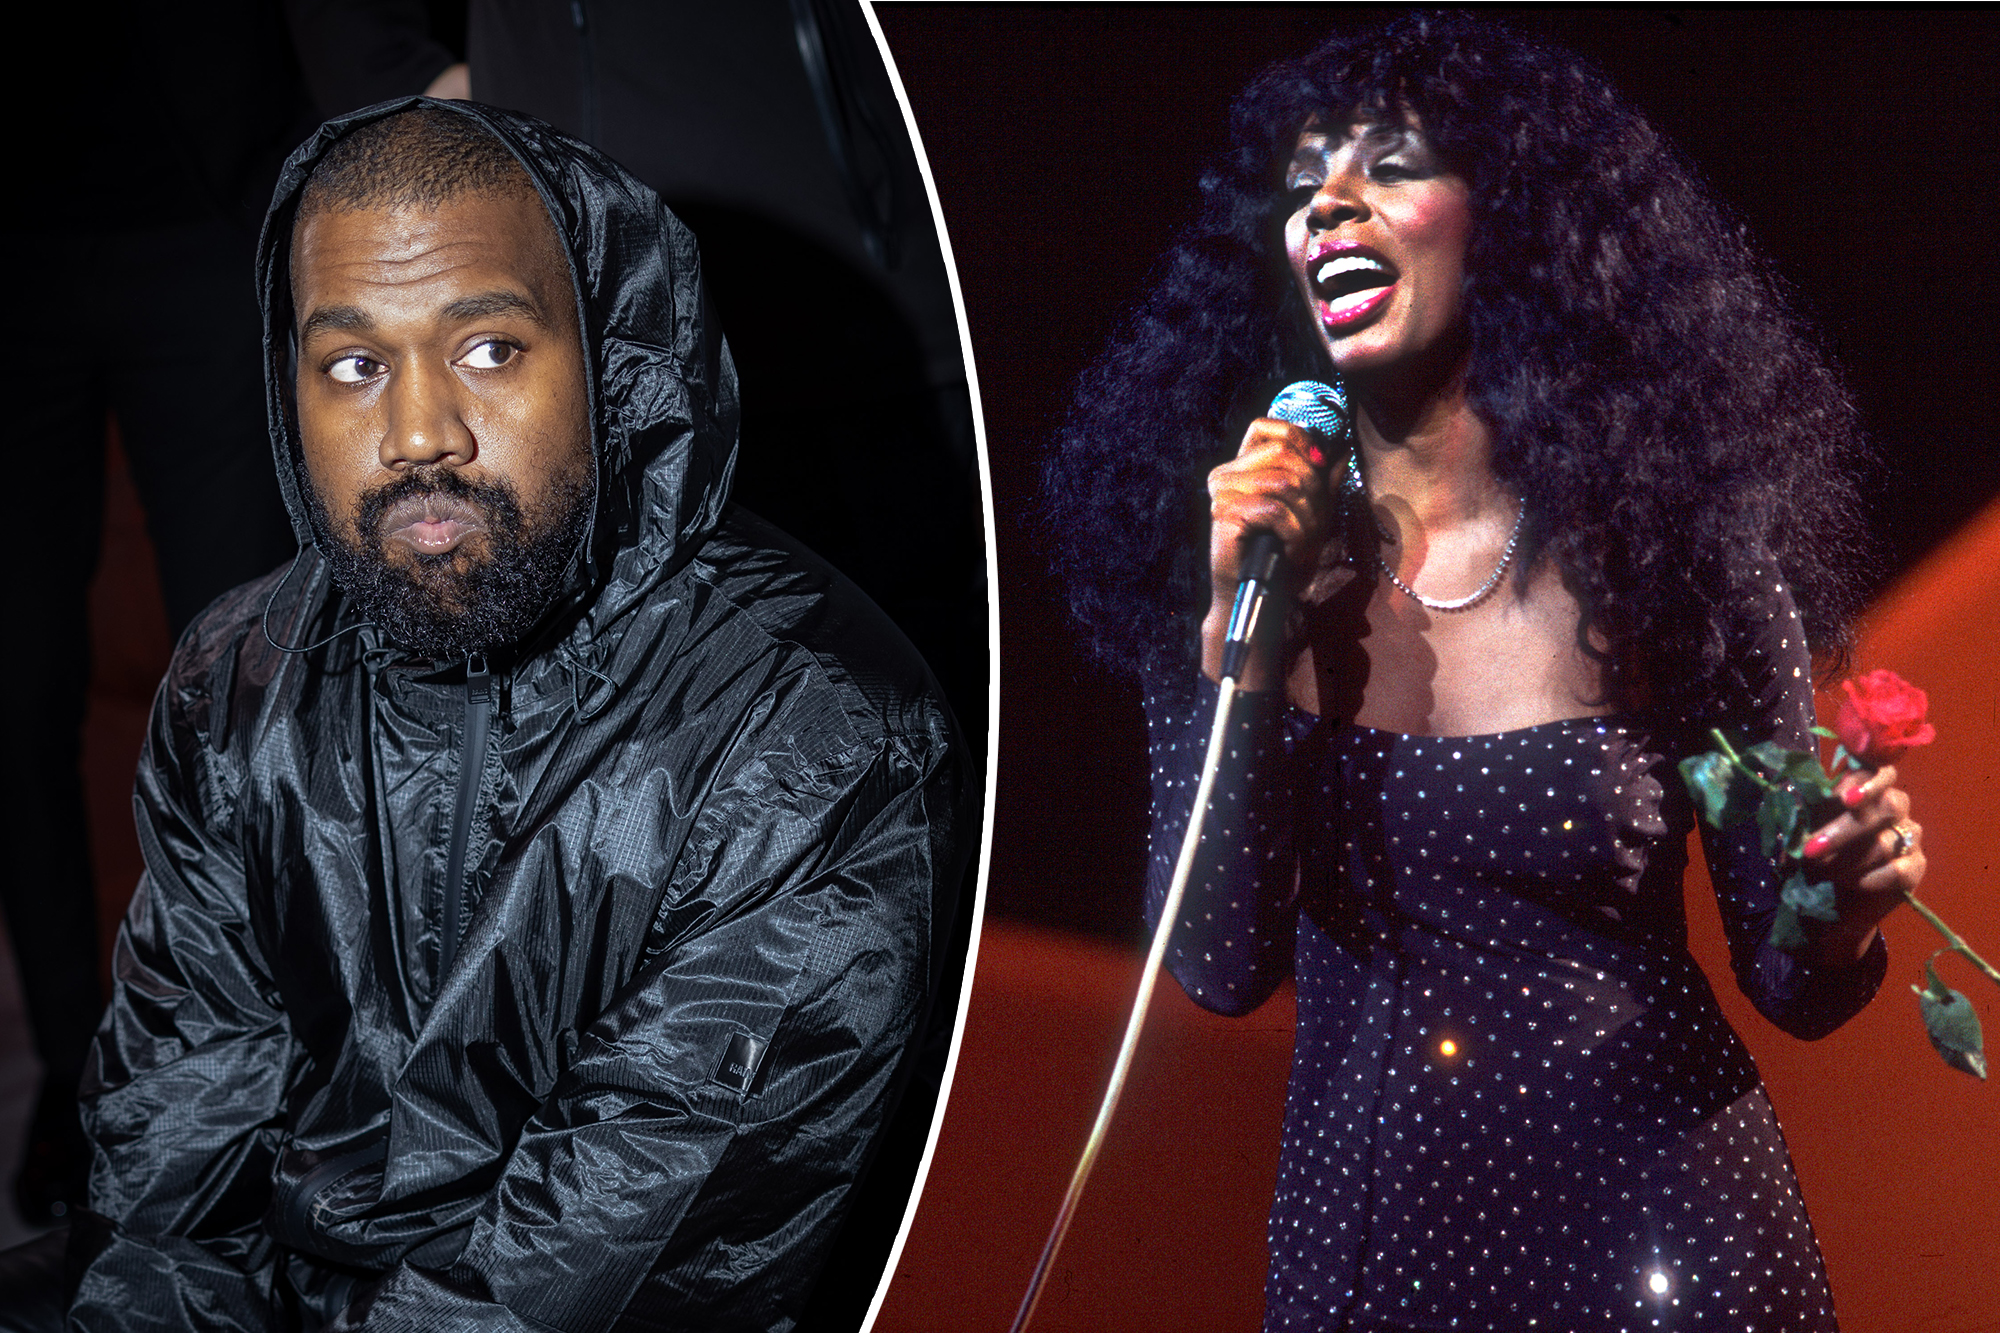 Controversial rapper Kanye West was sued by the estate of the late singer Donna Summer after the rapper reportedly used a sample of the late Queen of Disco's 1977 hit "I Feel Love" without permission.